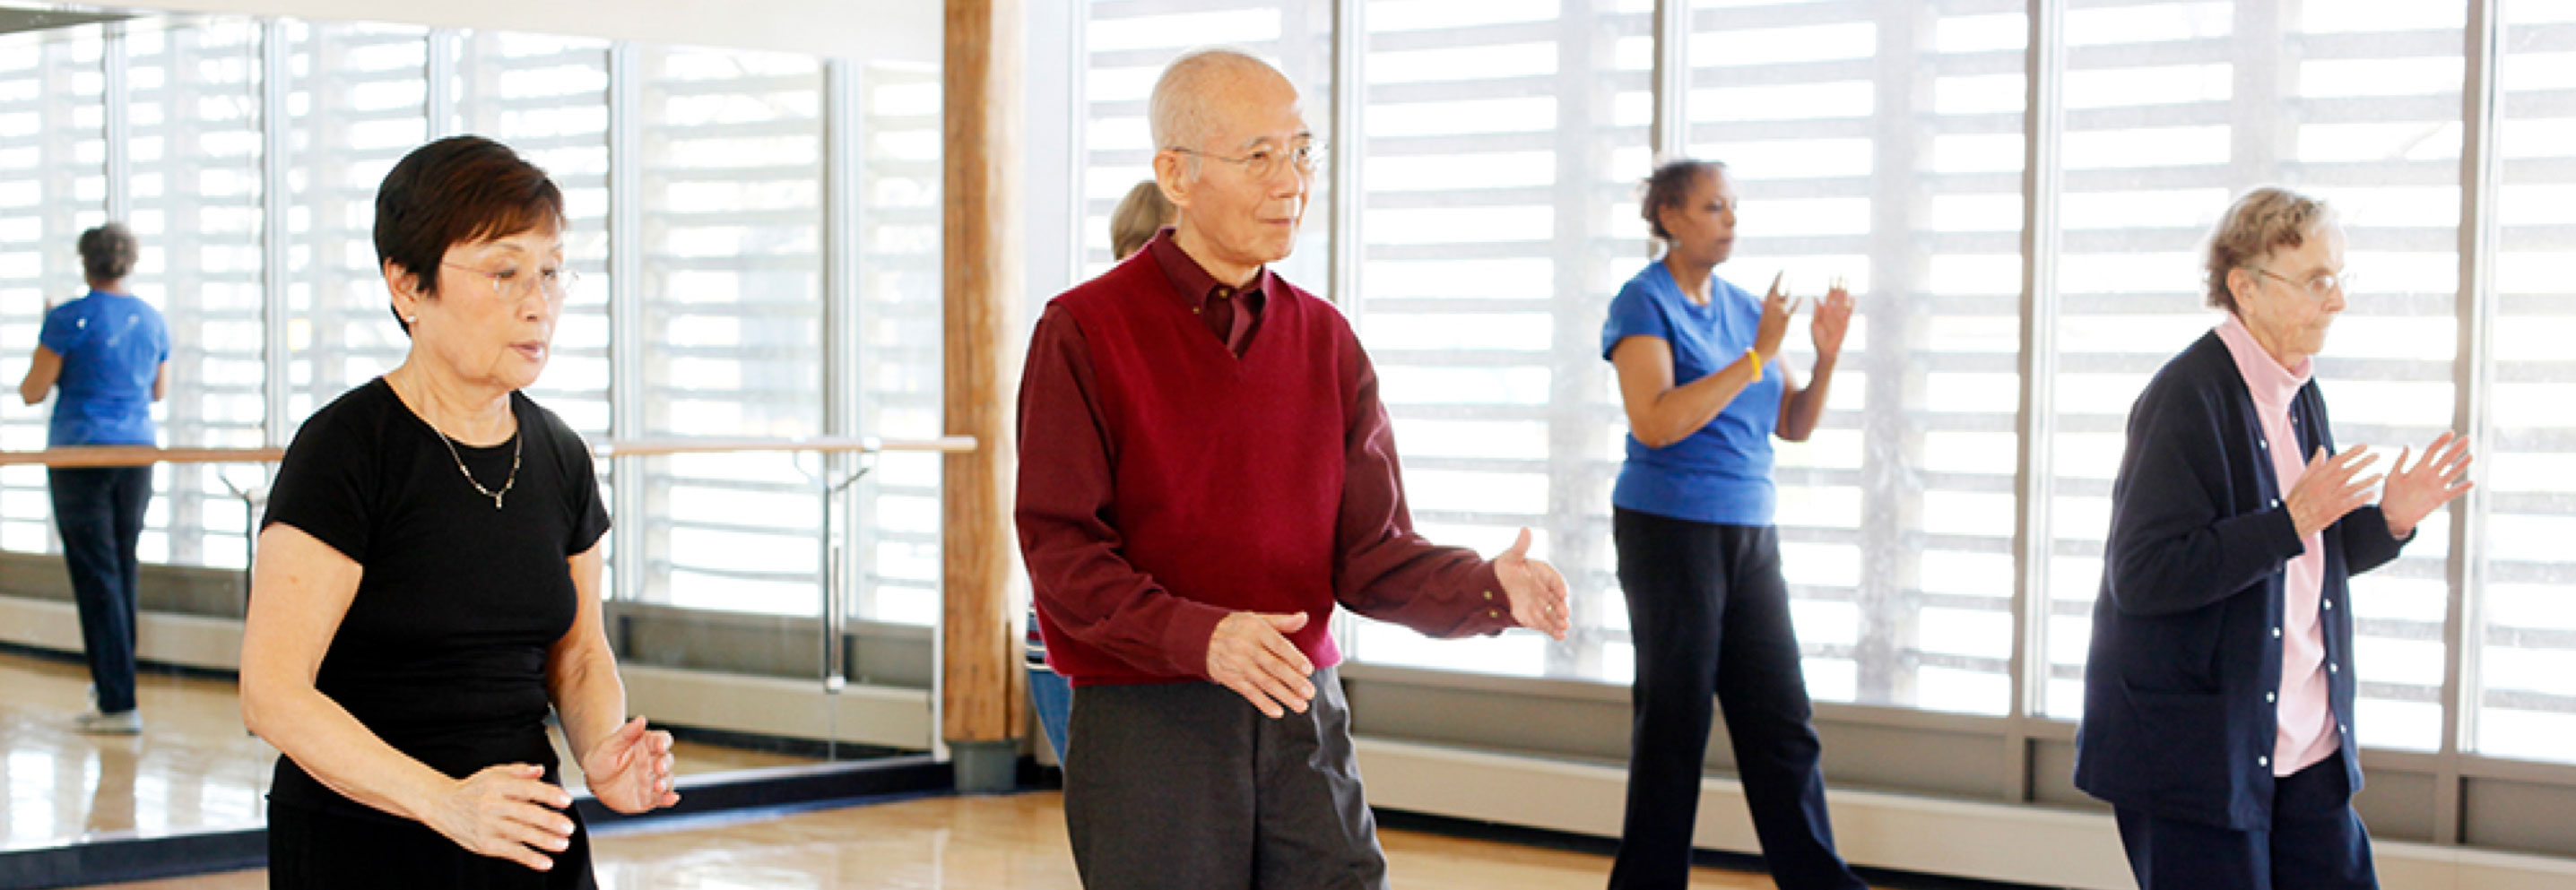 Elderly people practice thai chi in a room with mirrored walls